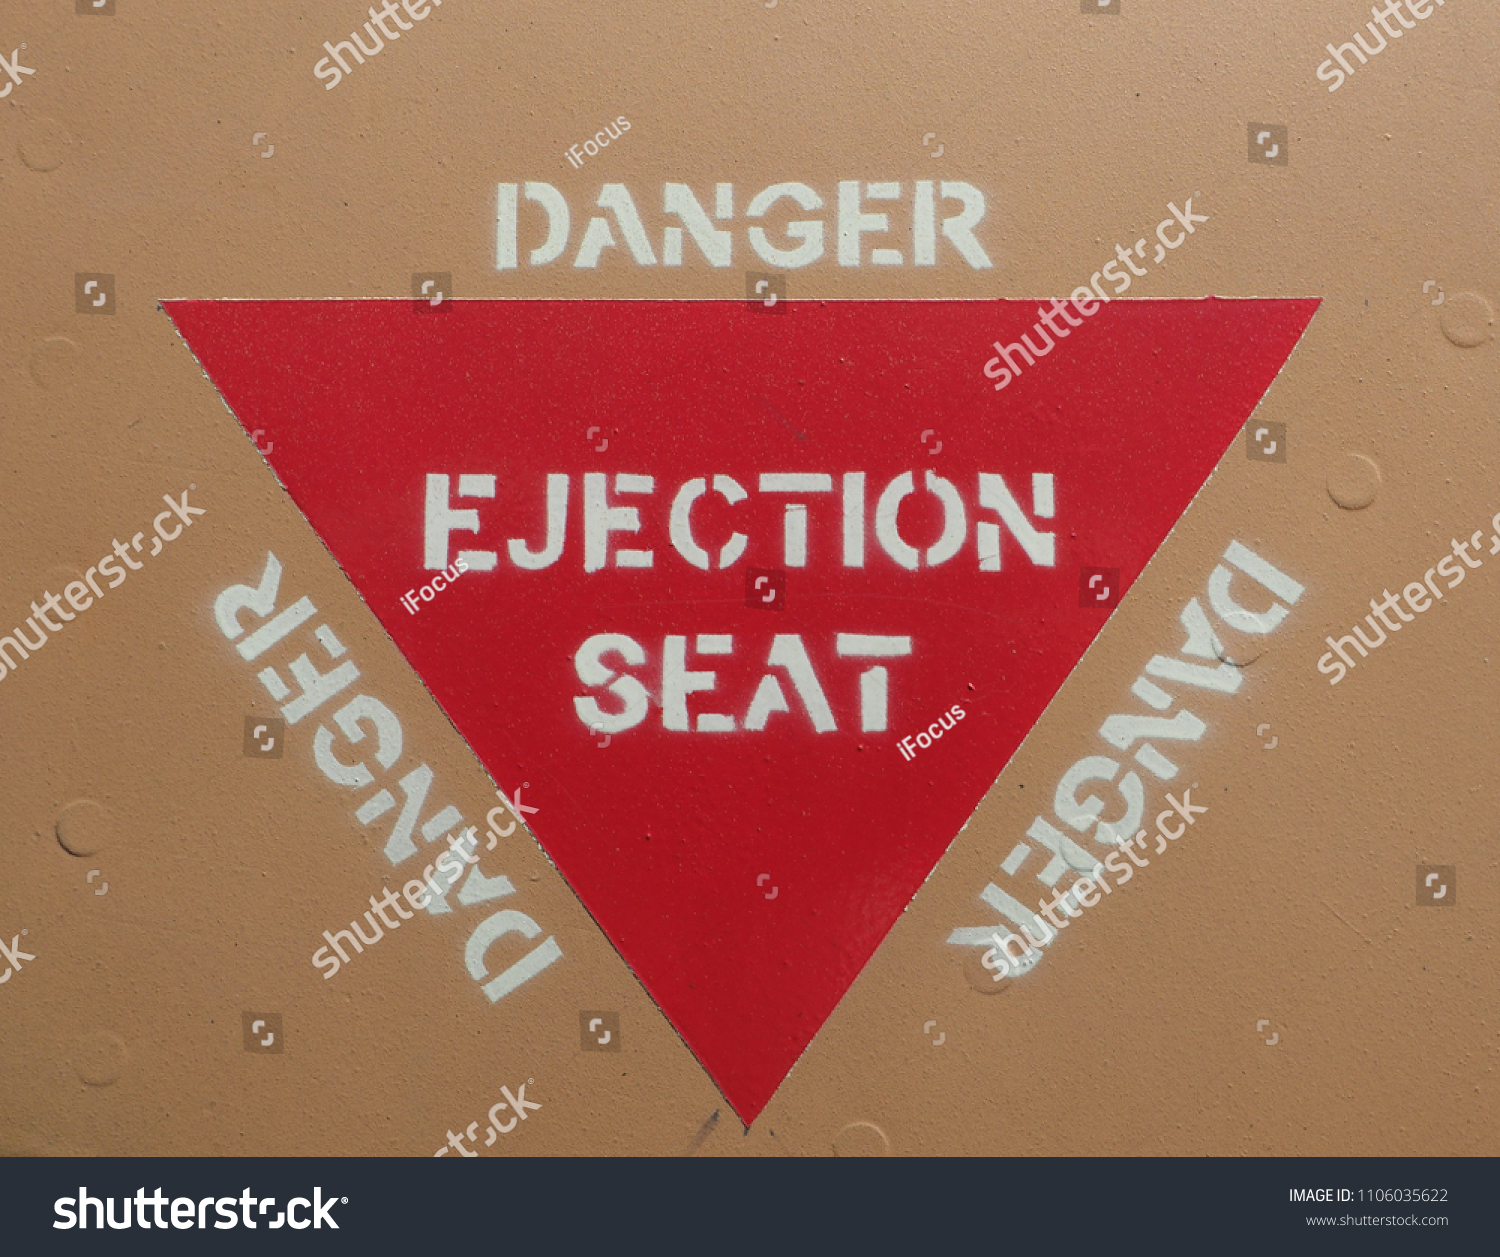 Ejection seat warning sign on fuselage background #1106035622